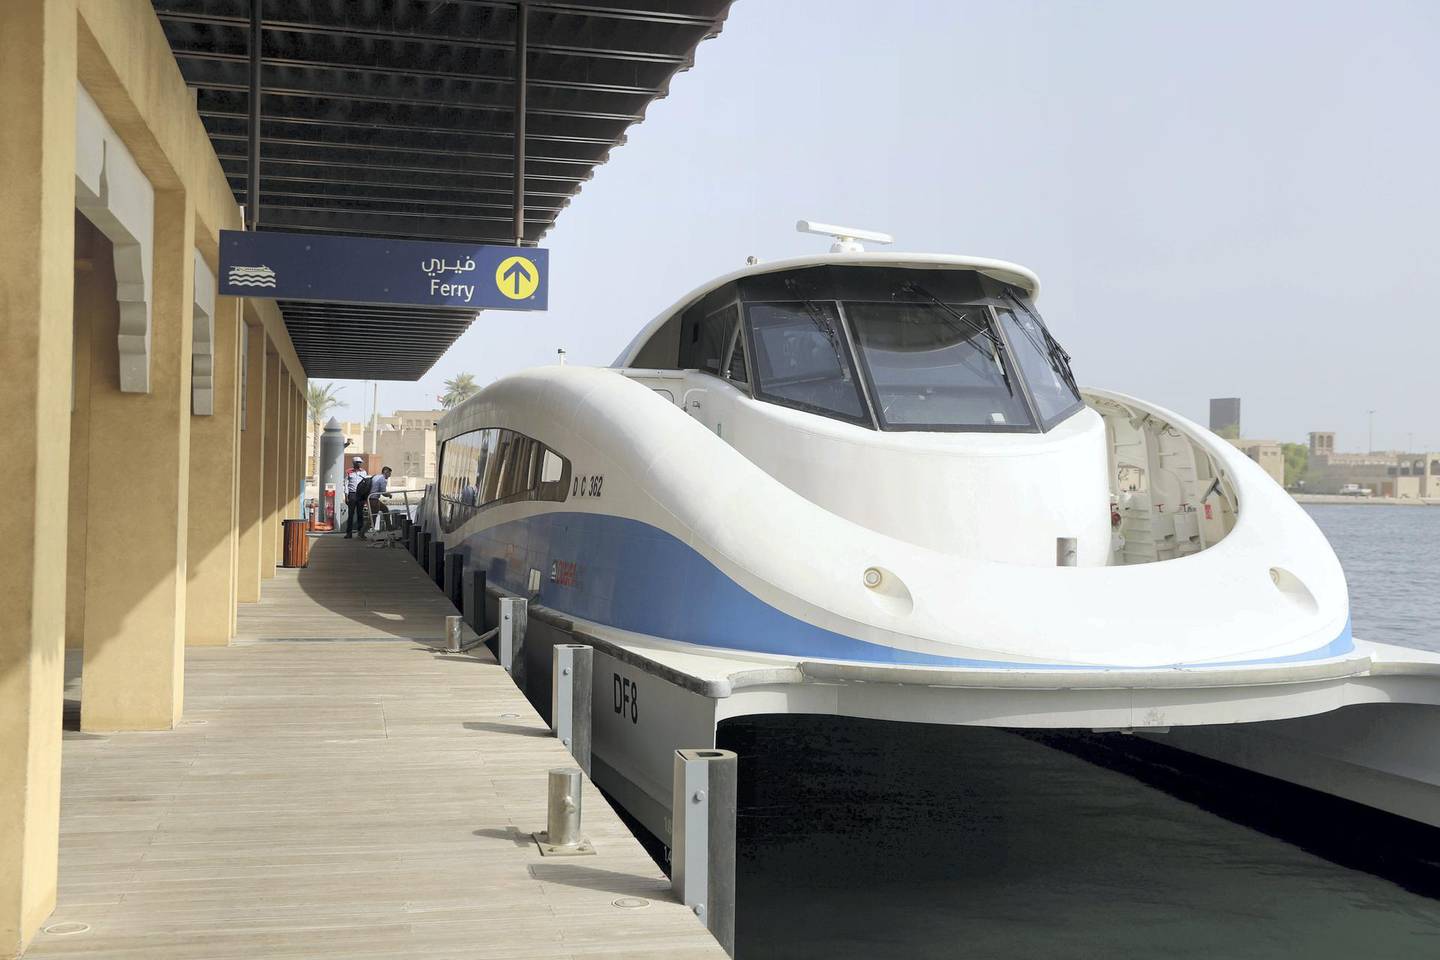 Dubai & Sharjah, United Arab Emirates - July 28, 2019: New Dubai-Sharjah commuter ferry is launched. Al Ghubaiba Water Transport Station. Sunday the 28th of July 2019. Chris Whiteoak / The National